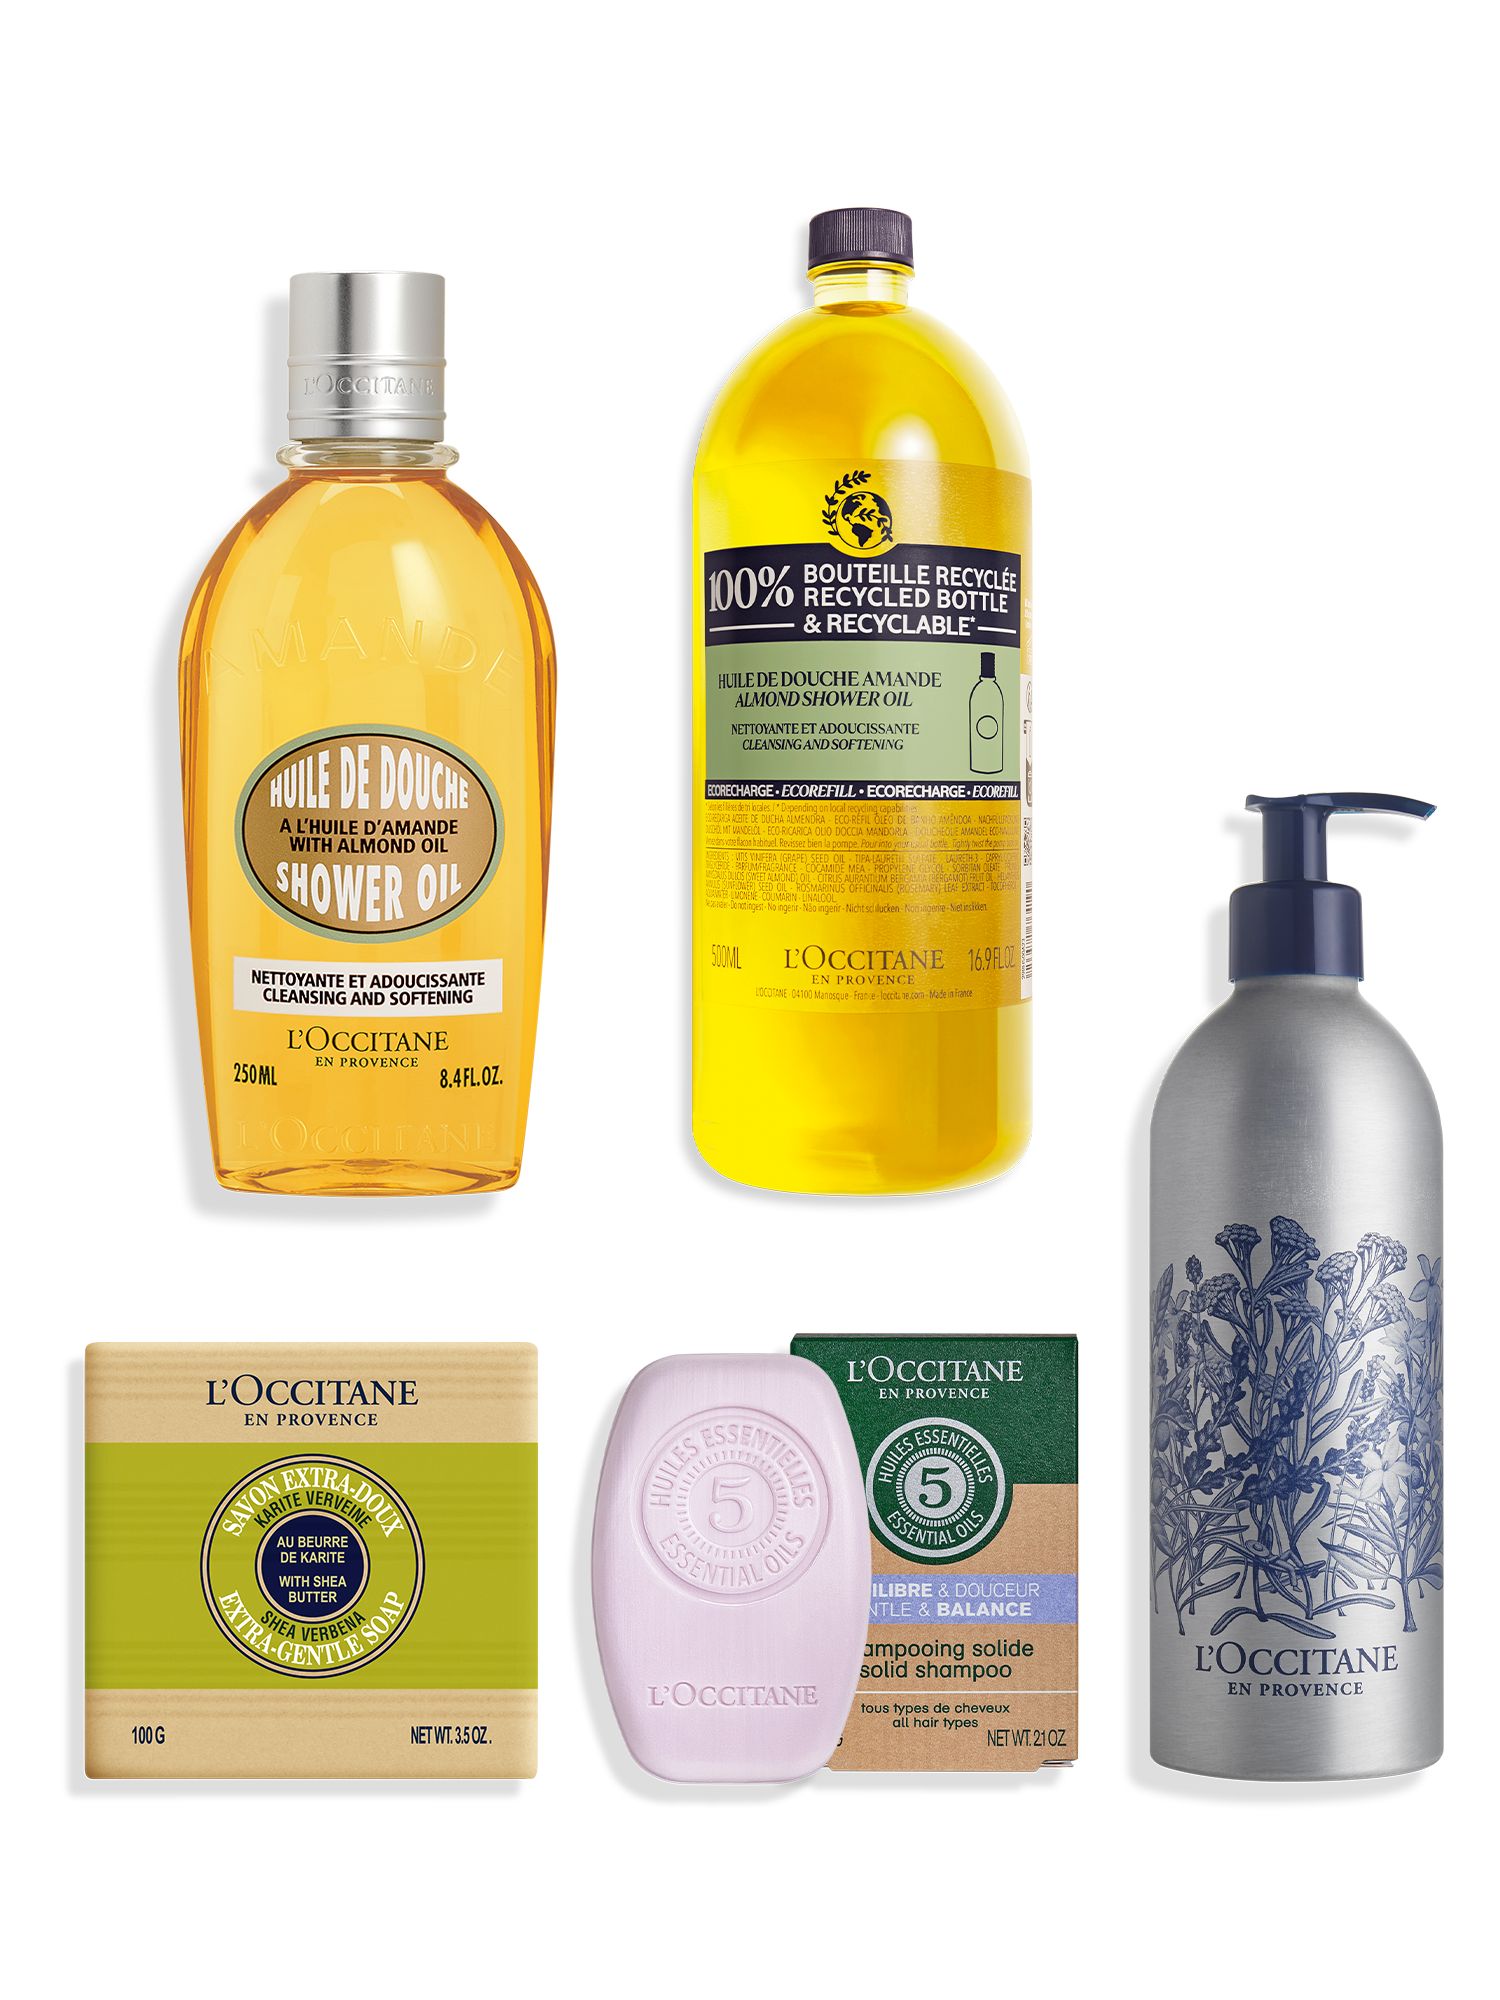 L'OCCITANE Almond Shower Oil 250ml & Refill Bundle with Gift